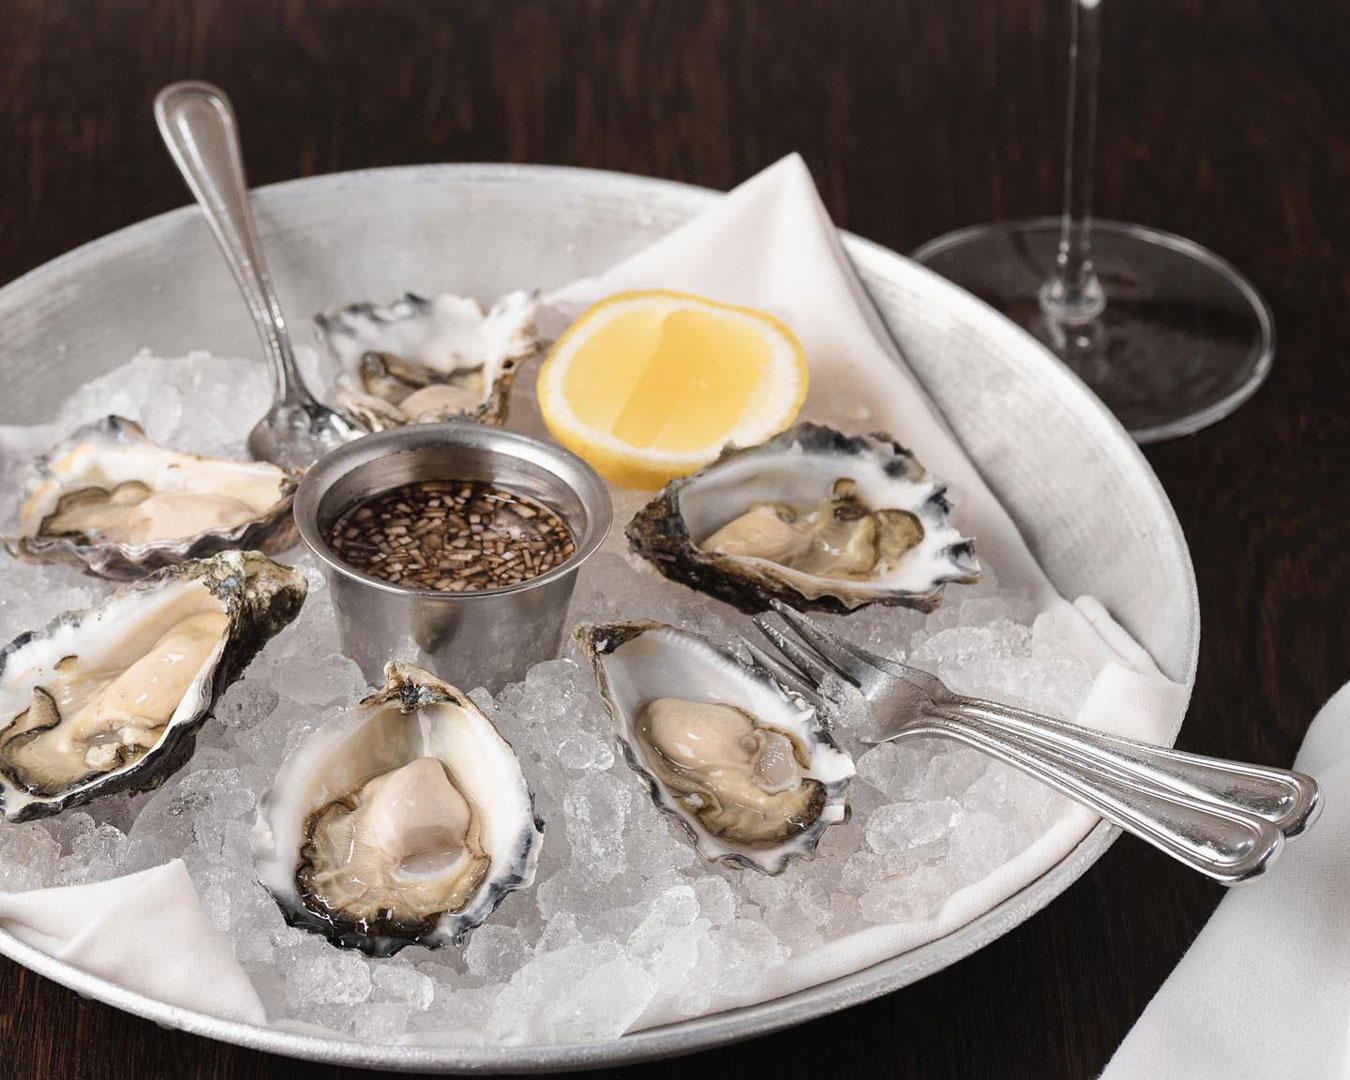 Plate of half-dozen oysters with lemon wedge